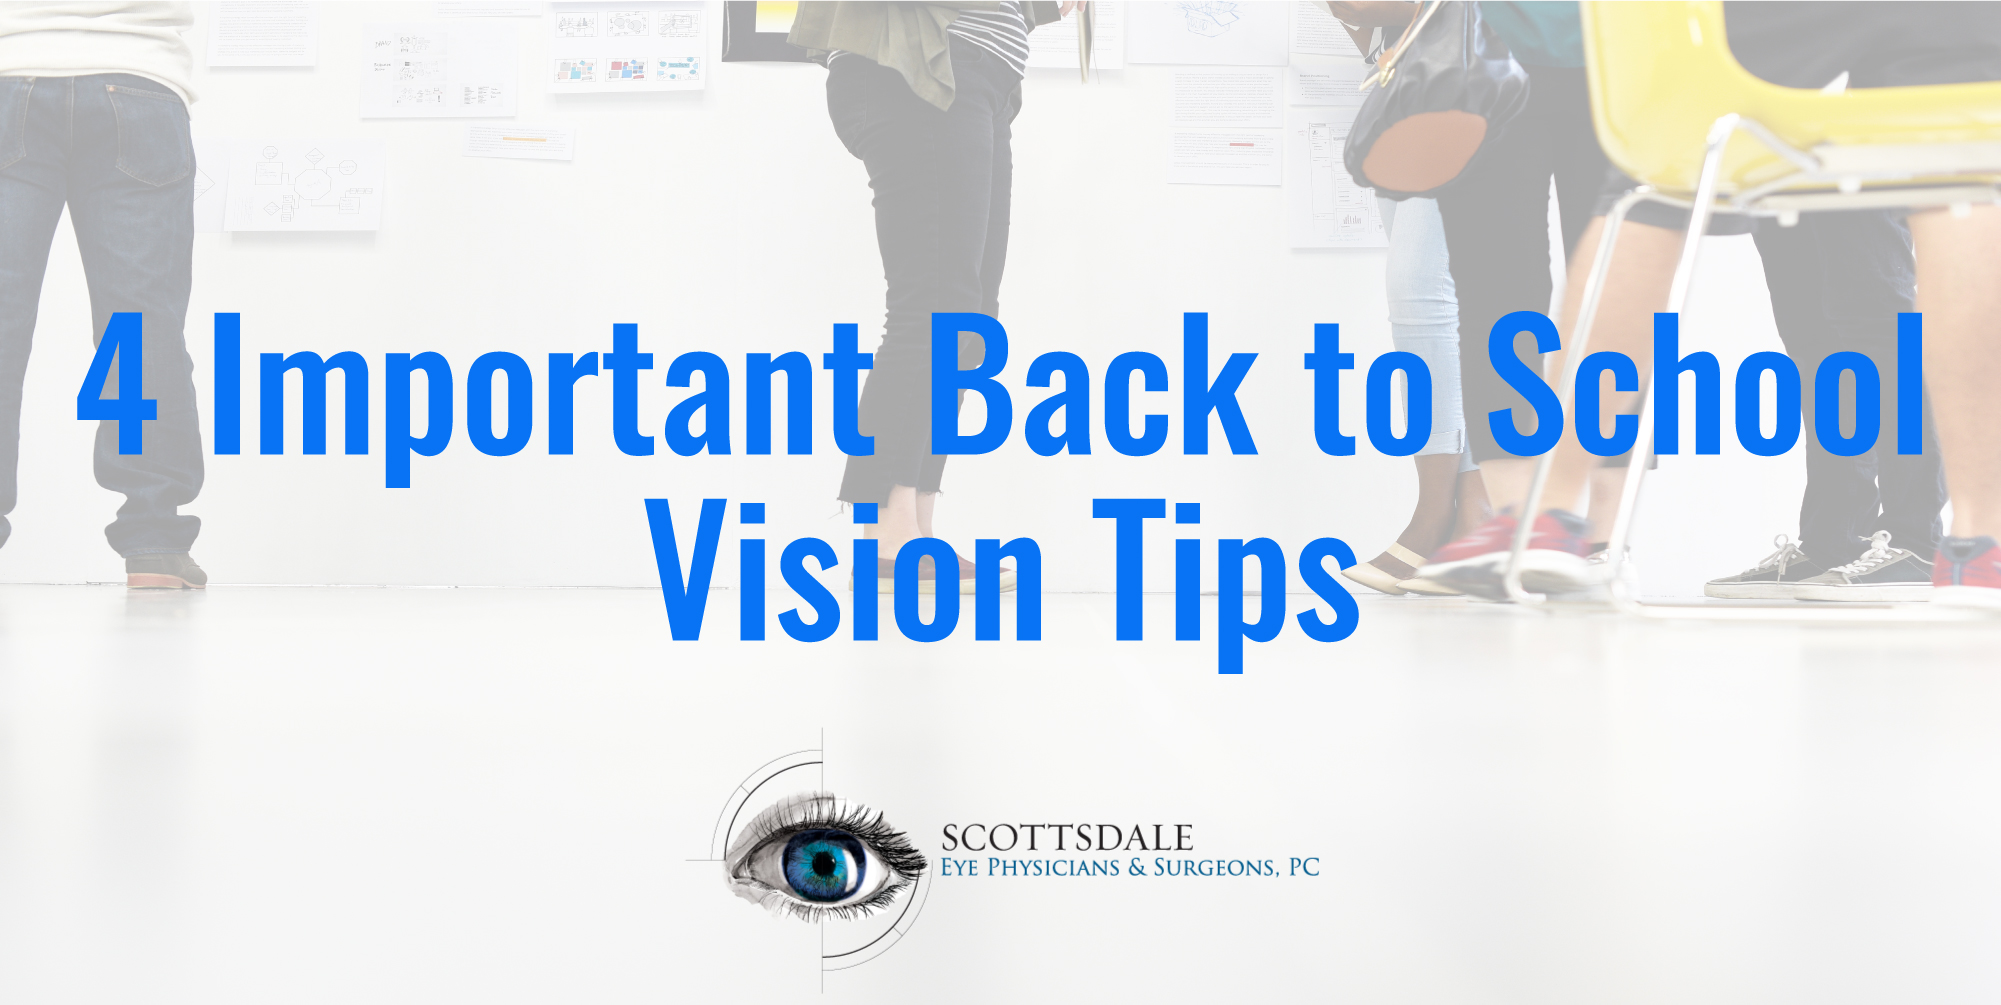 4 Important Back to School Vision Tips